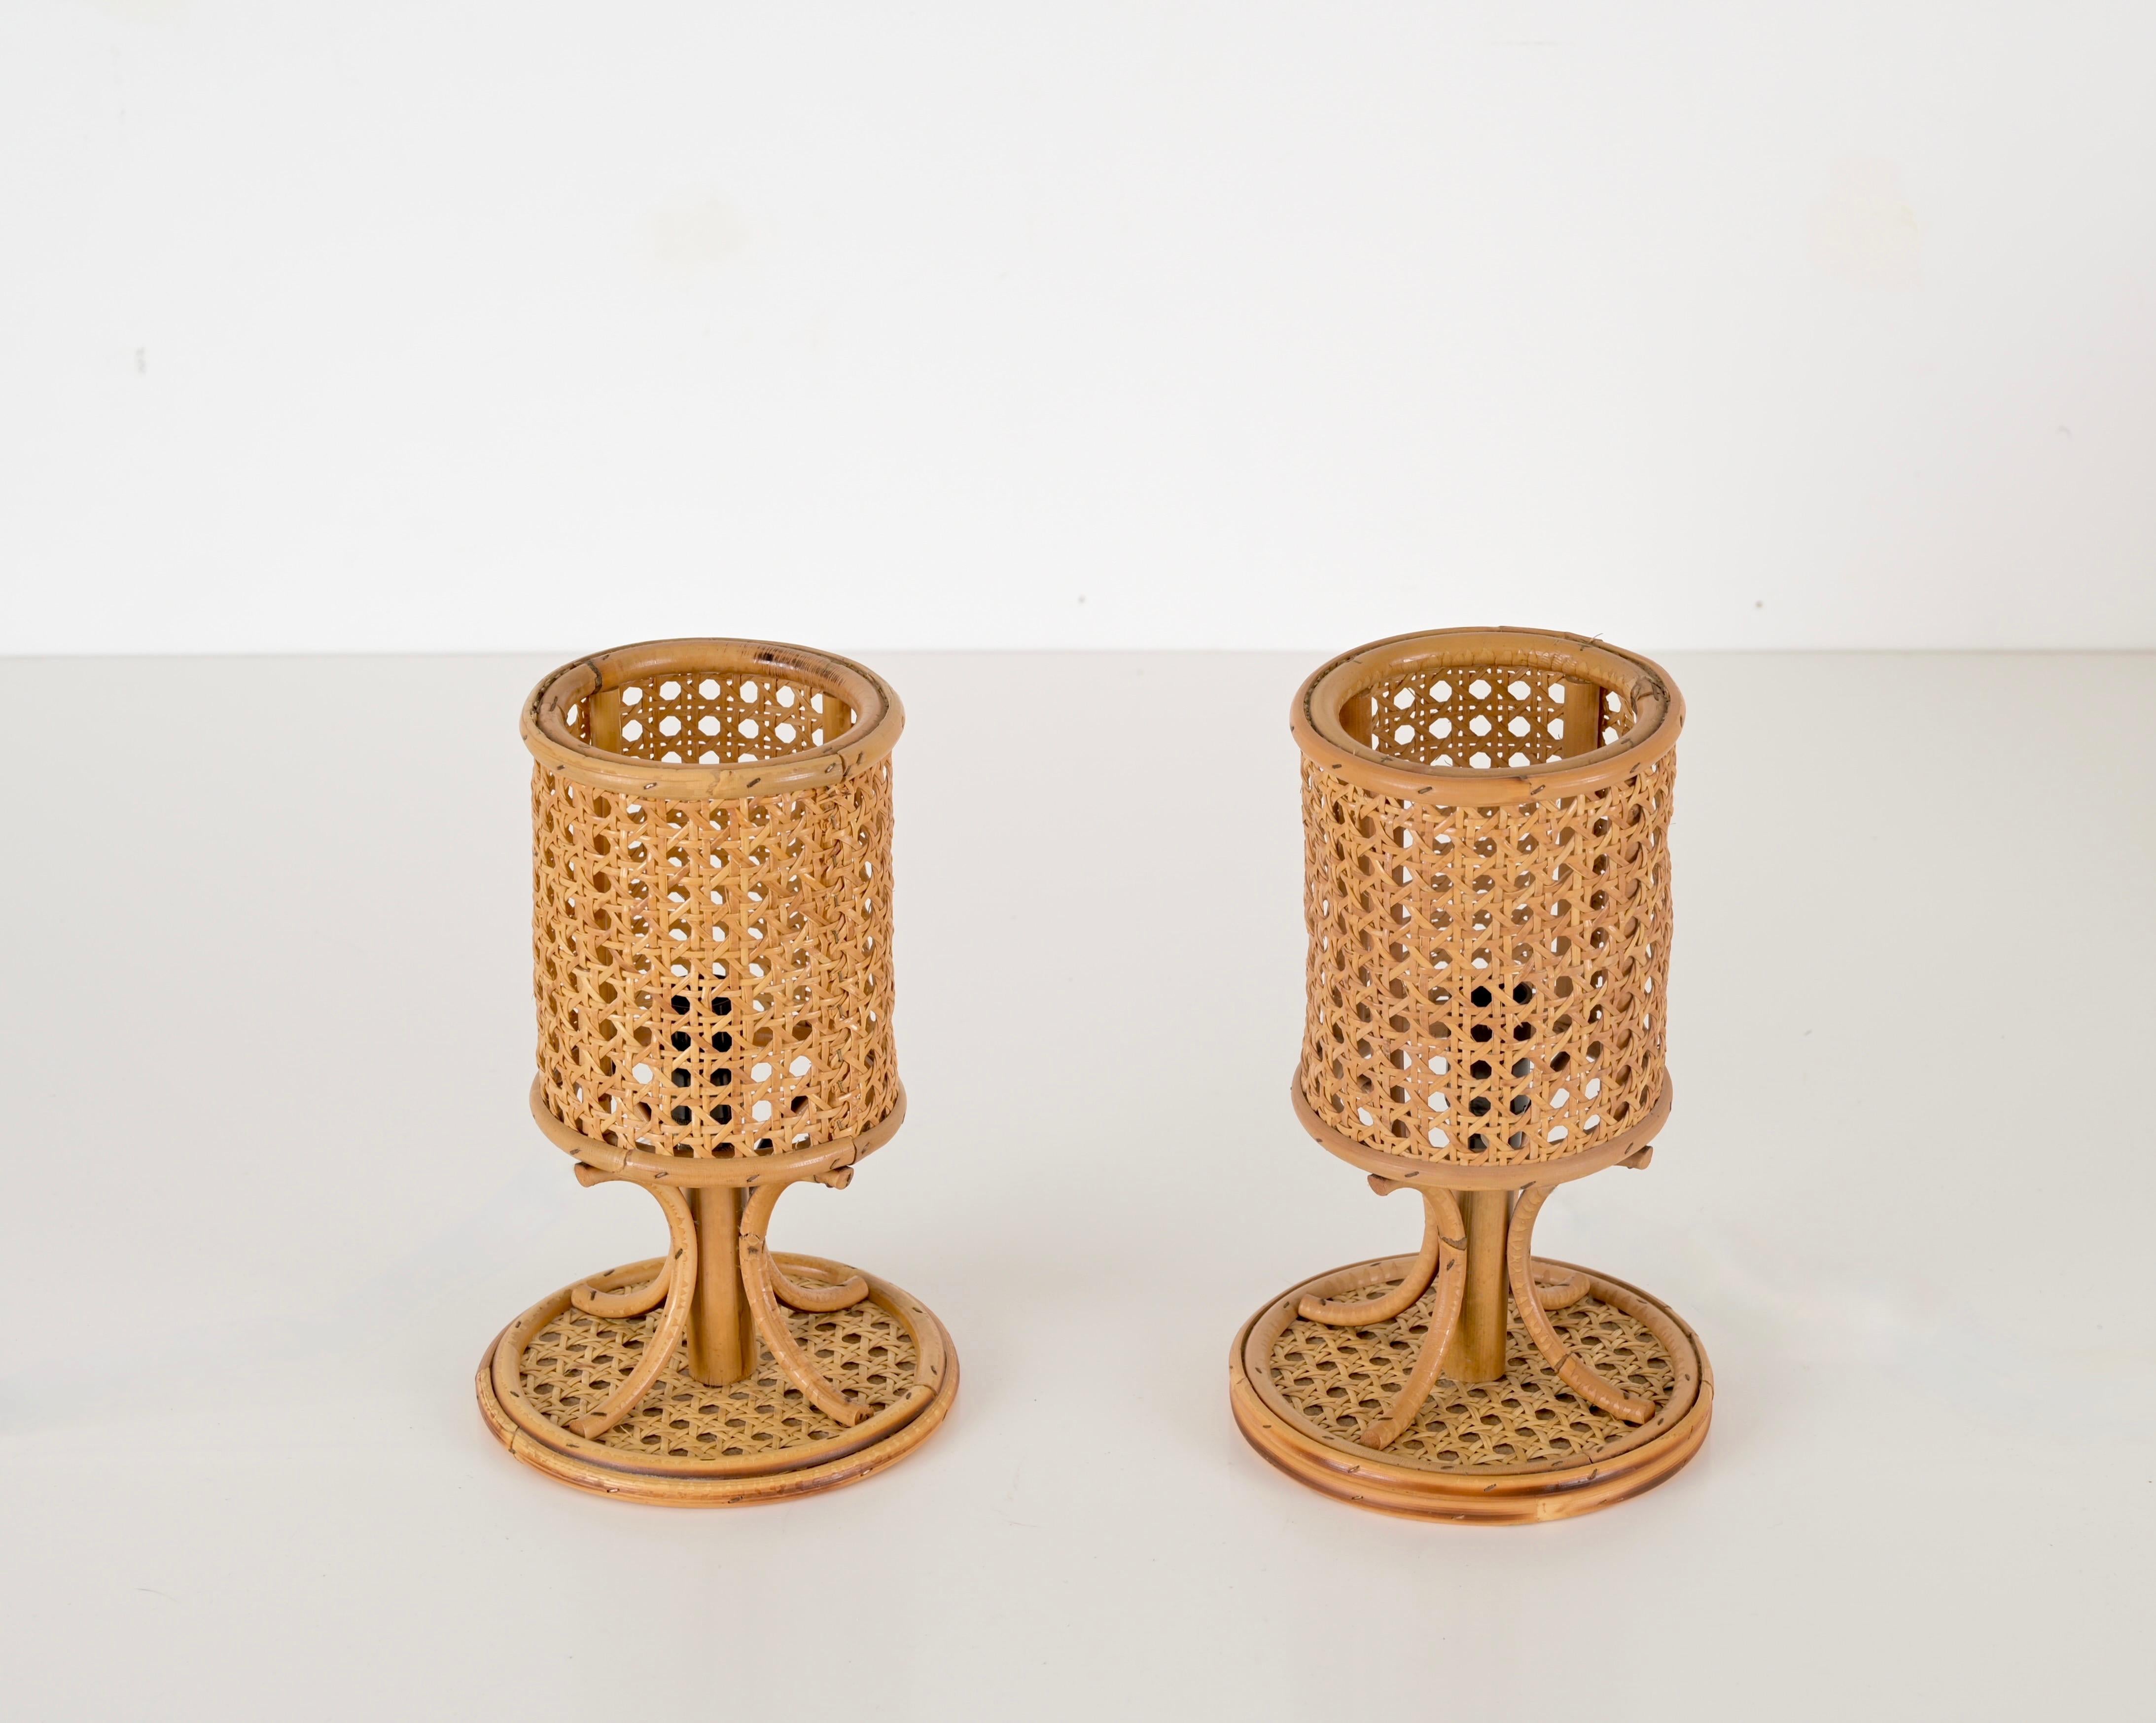 Lovely pair of round table lamp in curved rattan and hand-woven Vienna straw. These delightful French Riviera lamps were made in France during the 1960s and are attributed to Louis Sognot. 

The lamps feature a clear example of '60s craftsmanship